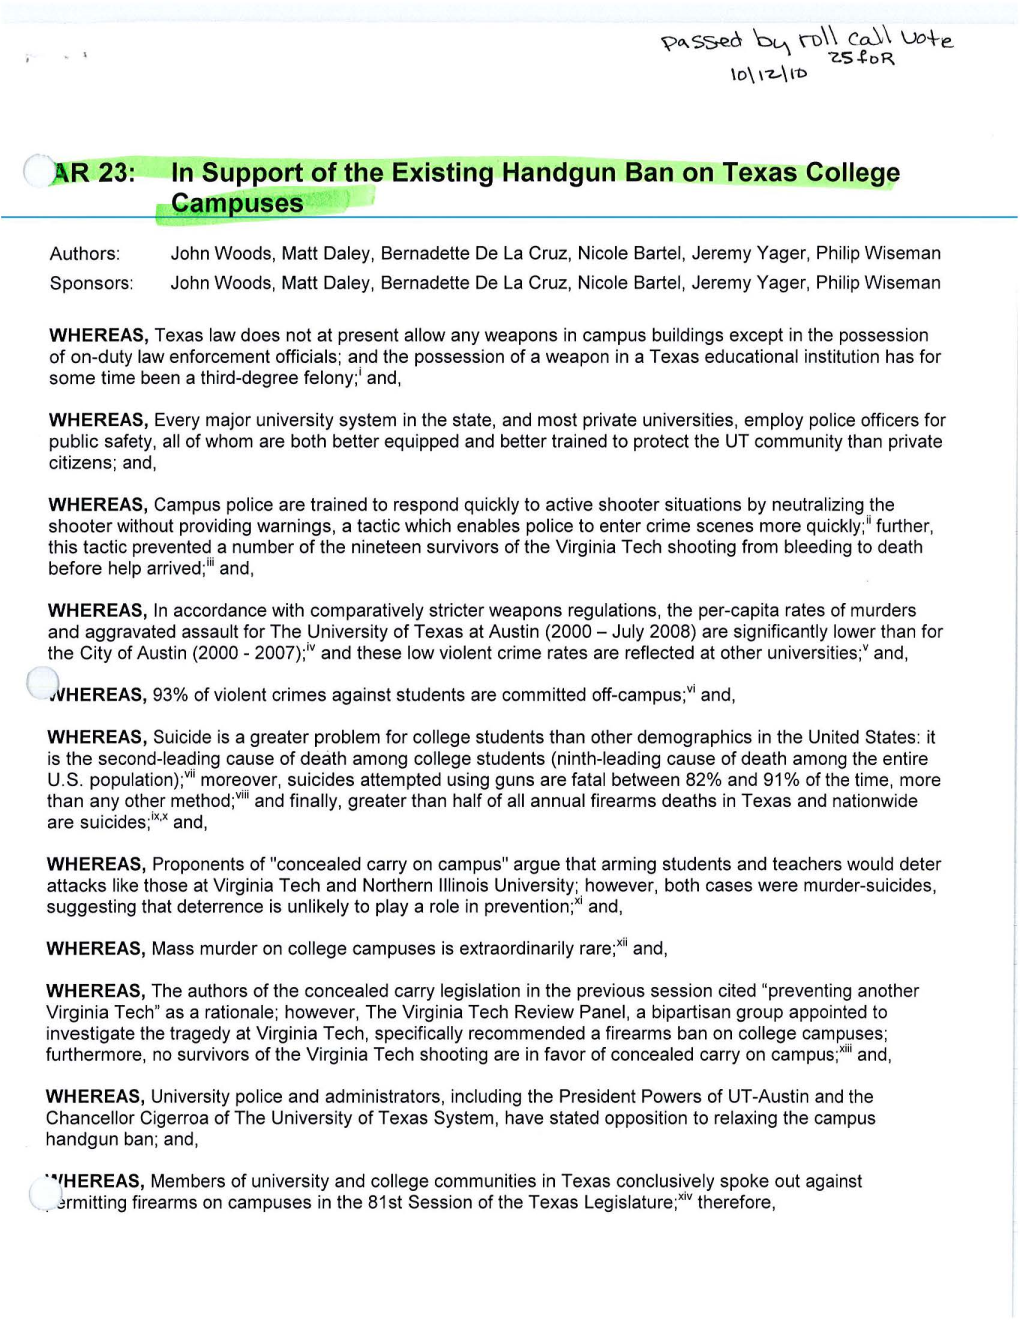 ( R 23: in Support of the Existing Handgun Ban on Texas College